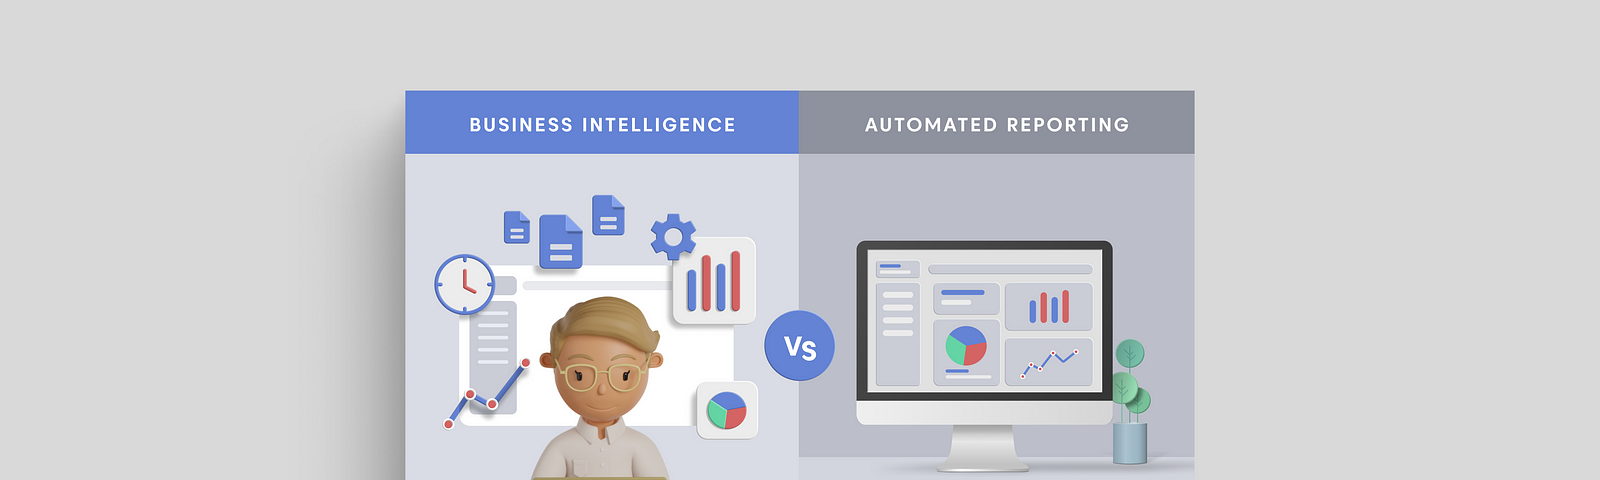 Automated Reporting vs. BI: What an Organization Should Consider